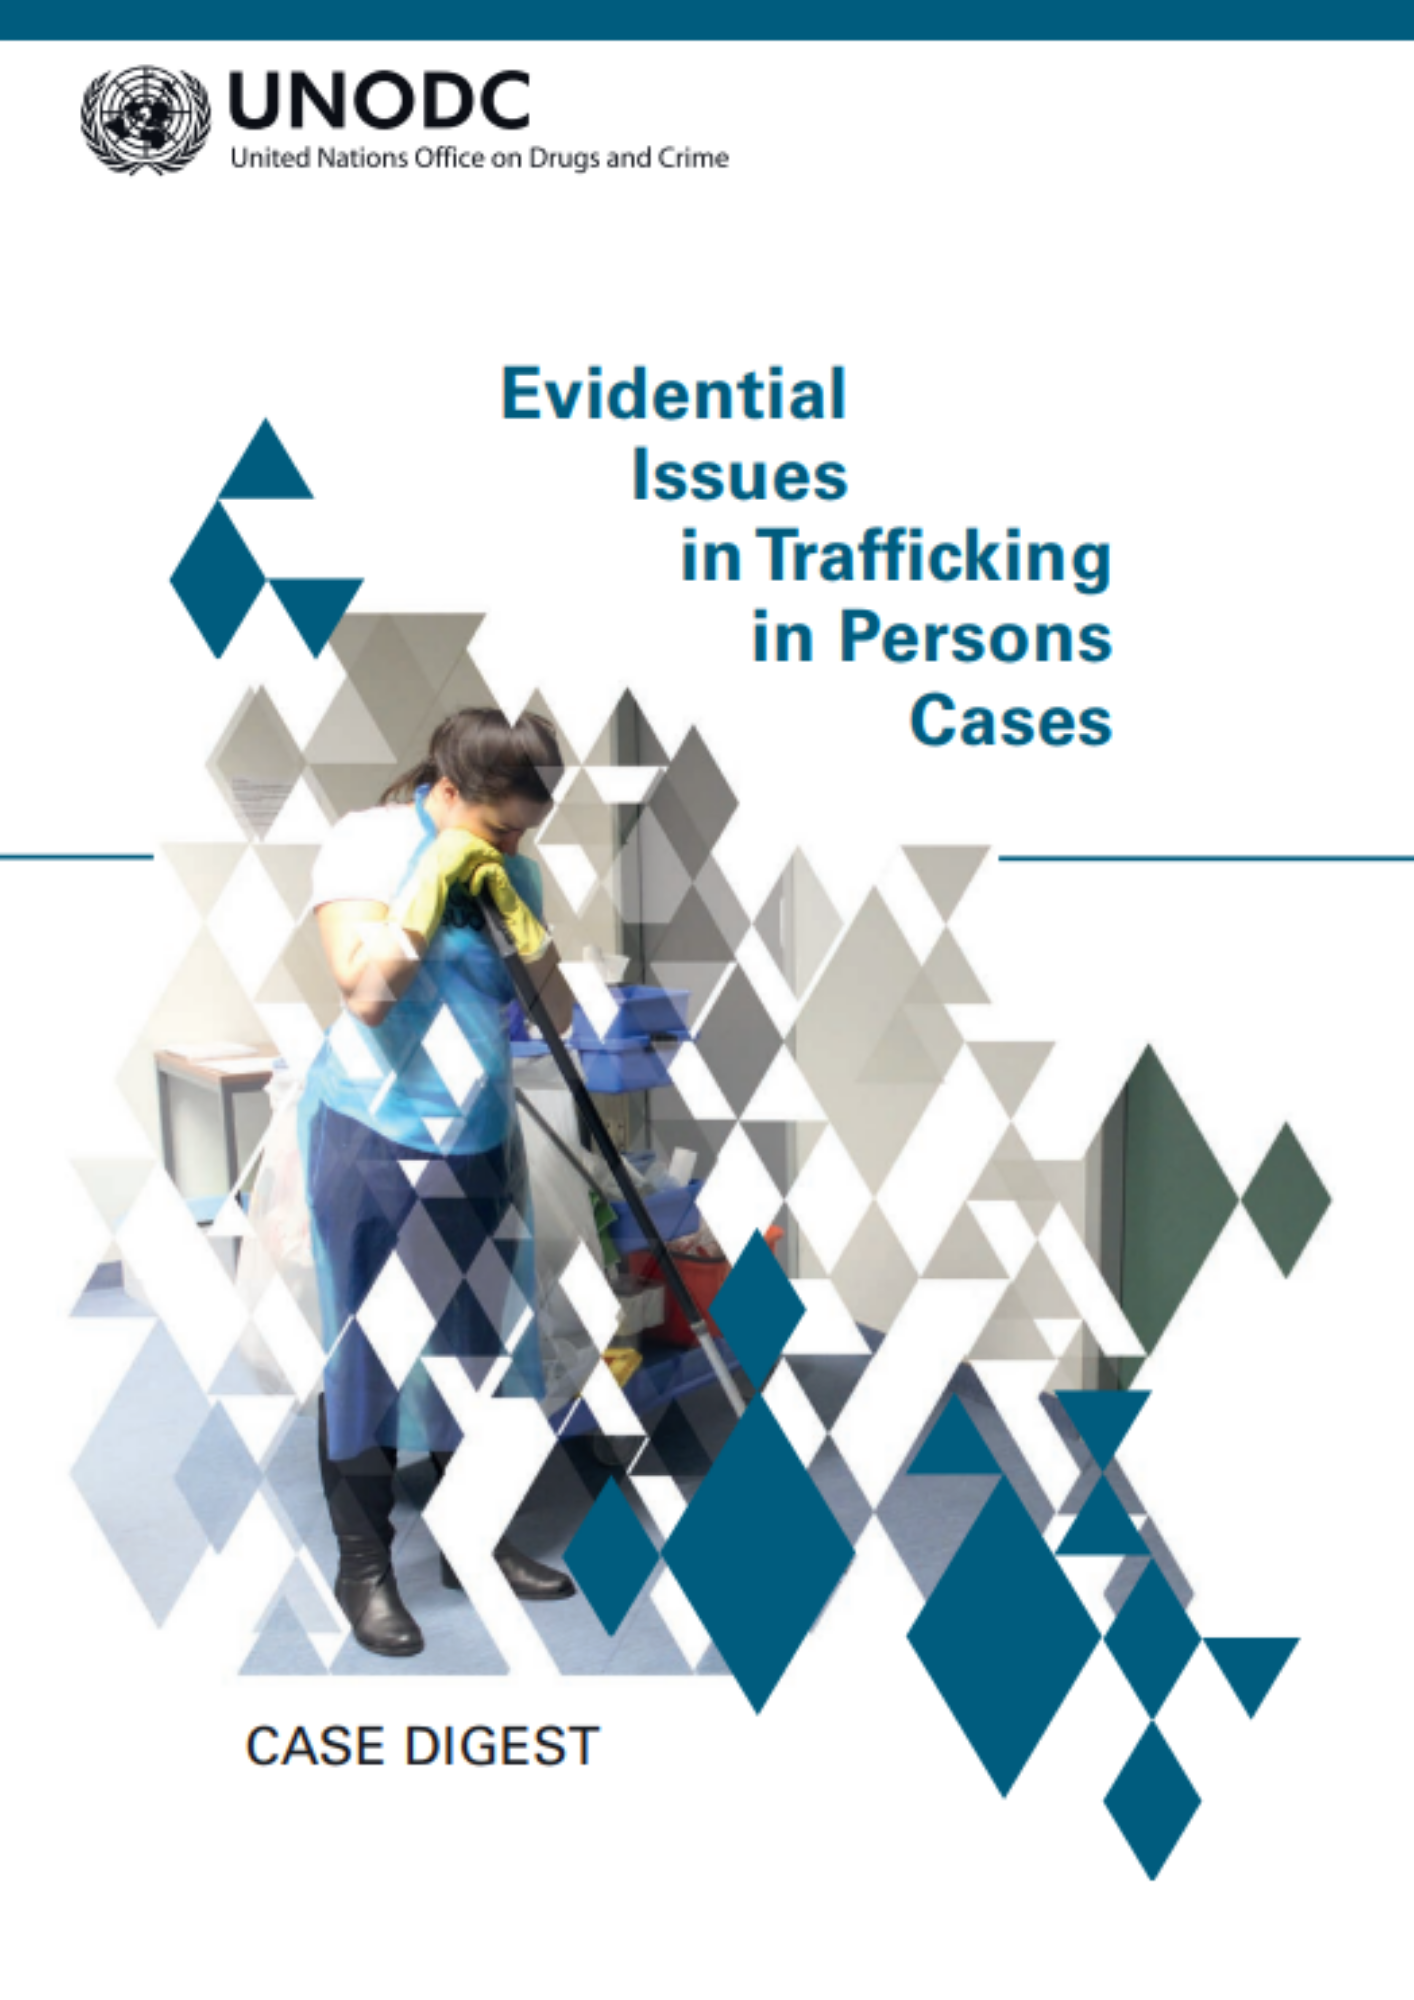 <div style="text-align: center;"><a href="https://www.unodc.org/documents/human-trafficking/2017/Case_Digest_Evidential_Issues_in_Trafficking.pdf">贩运人口案件中的证据问题<br /></a></div>